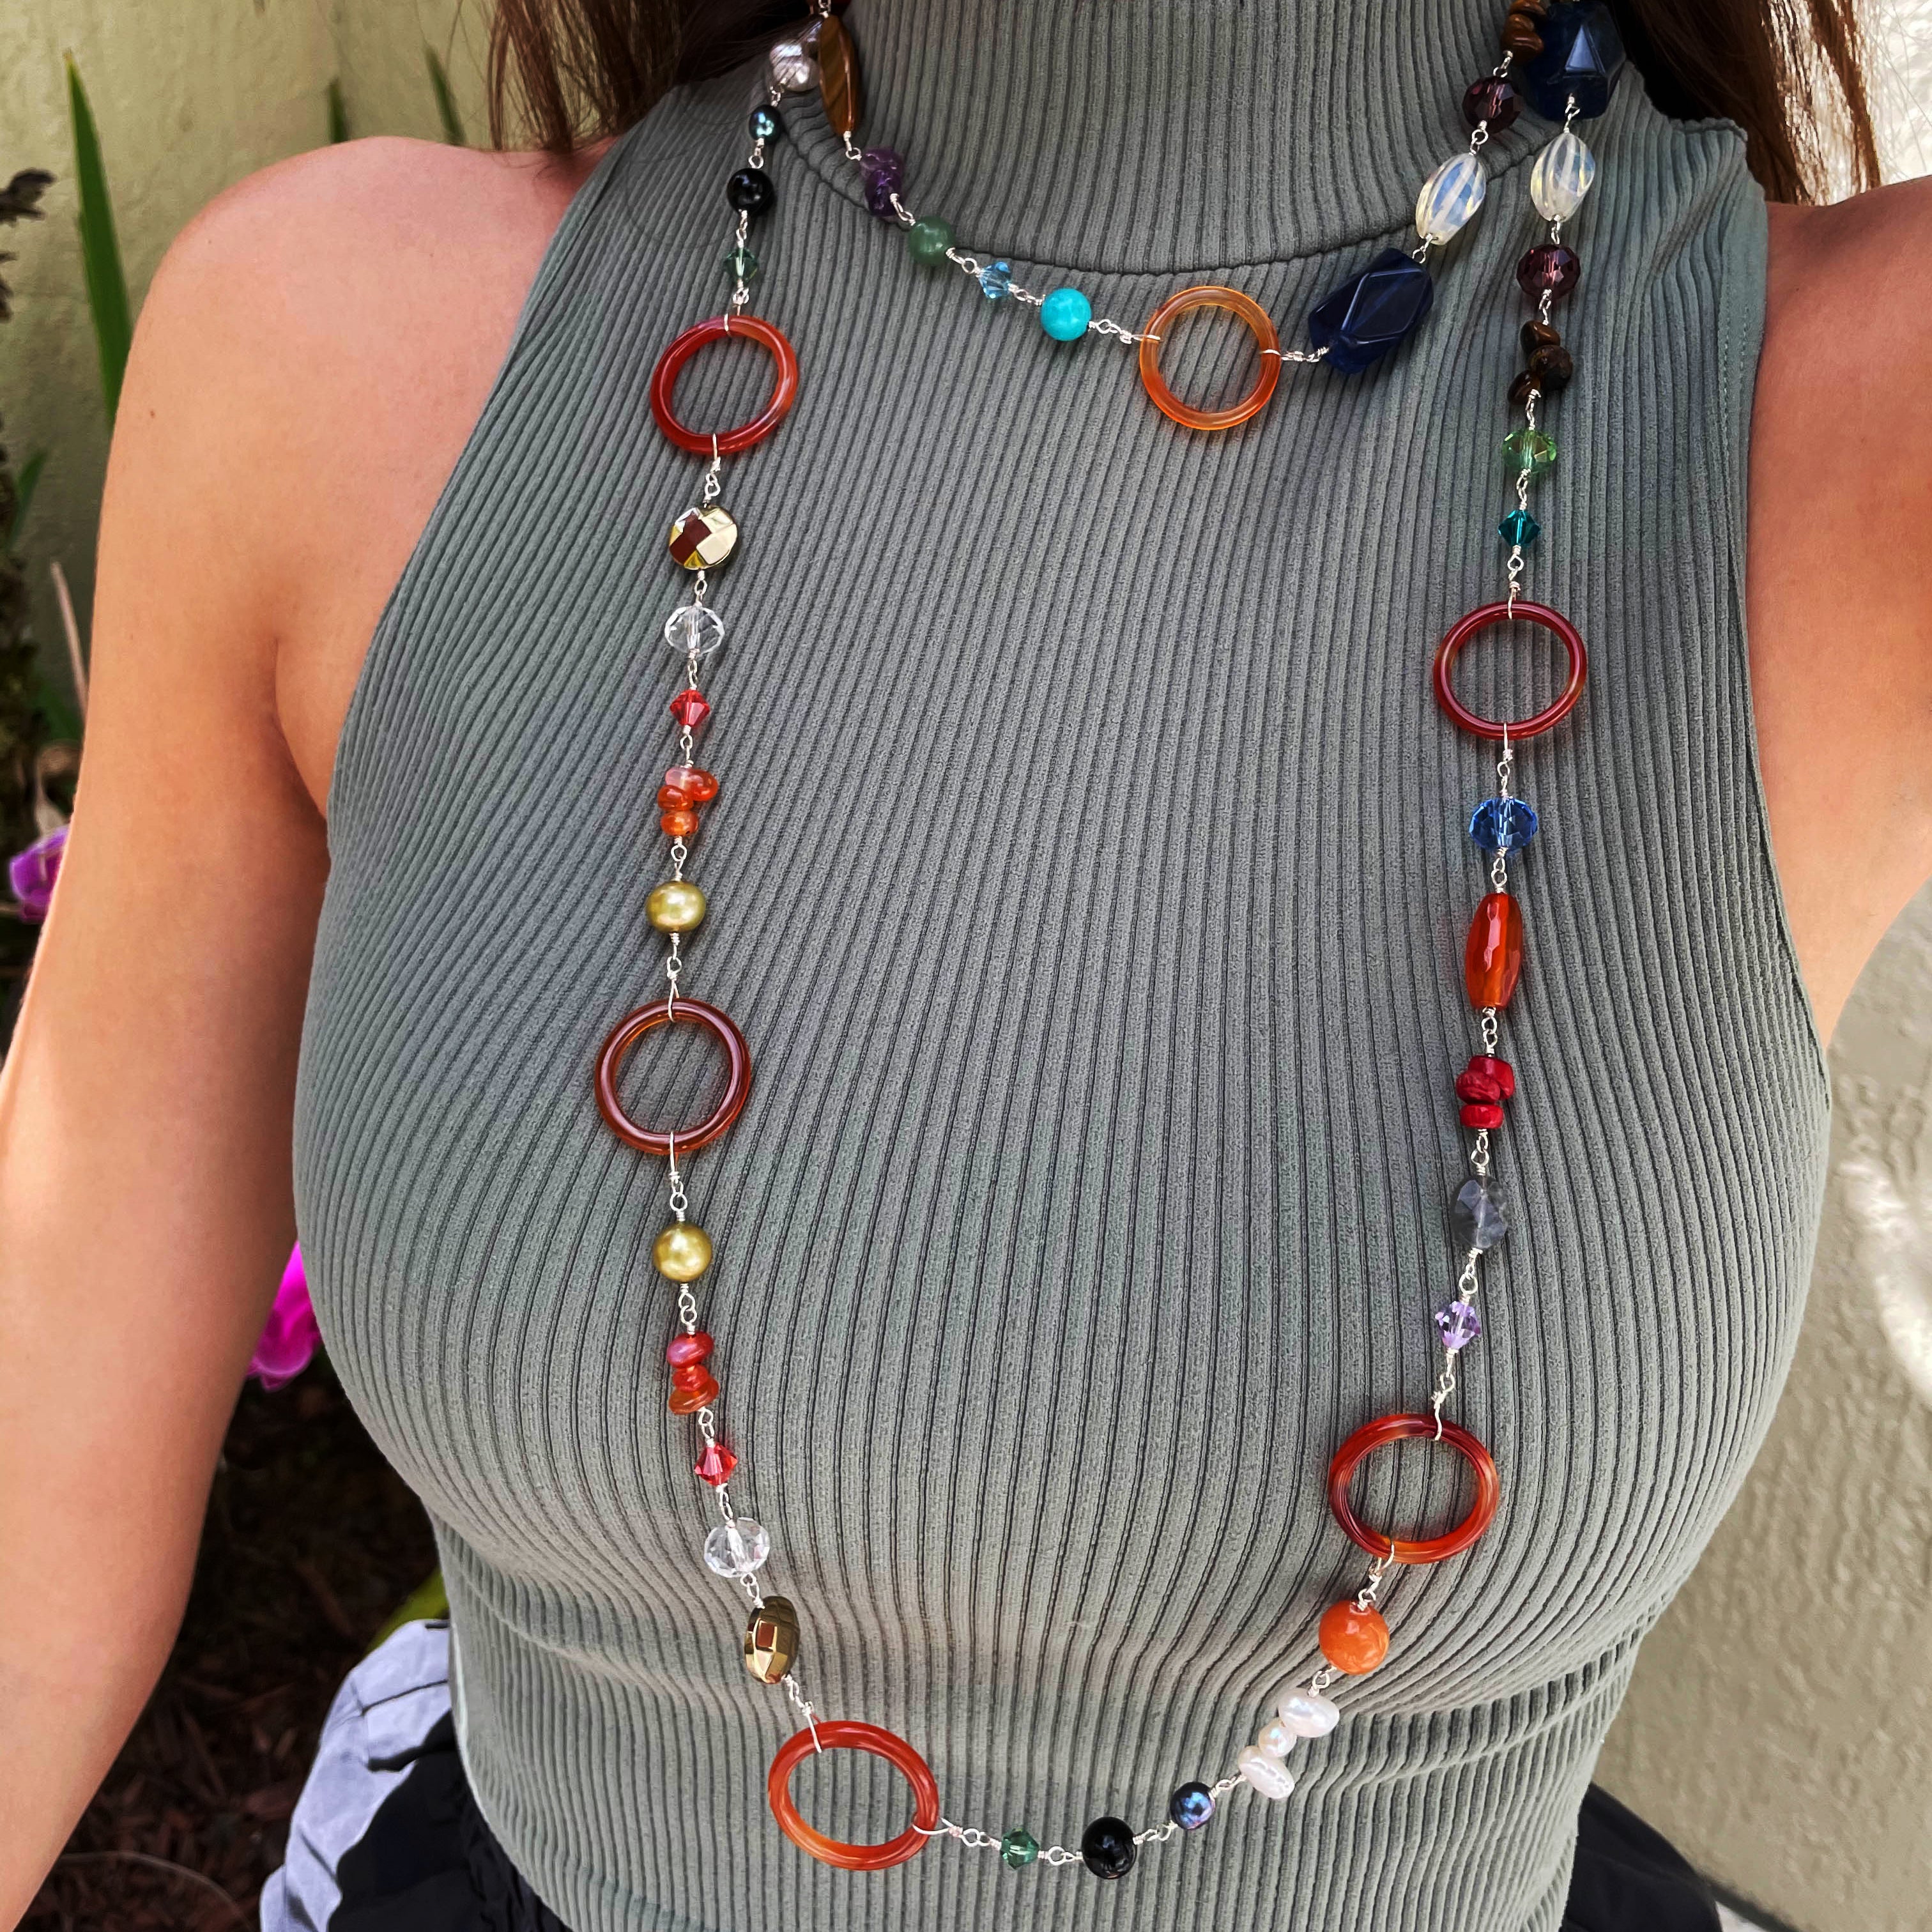 Sorted Colorful Beads and Pearls Necklace - Custom Made